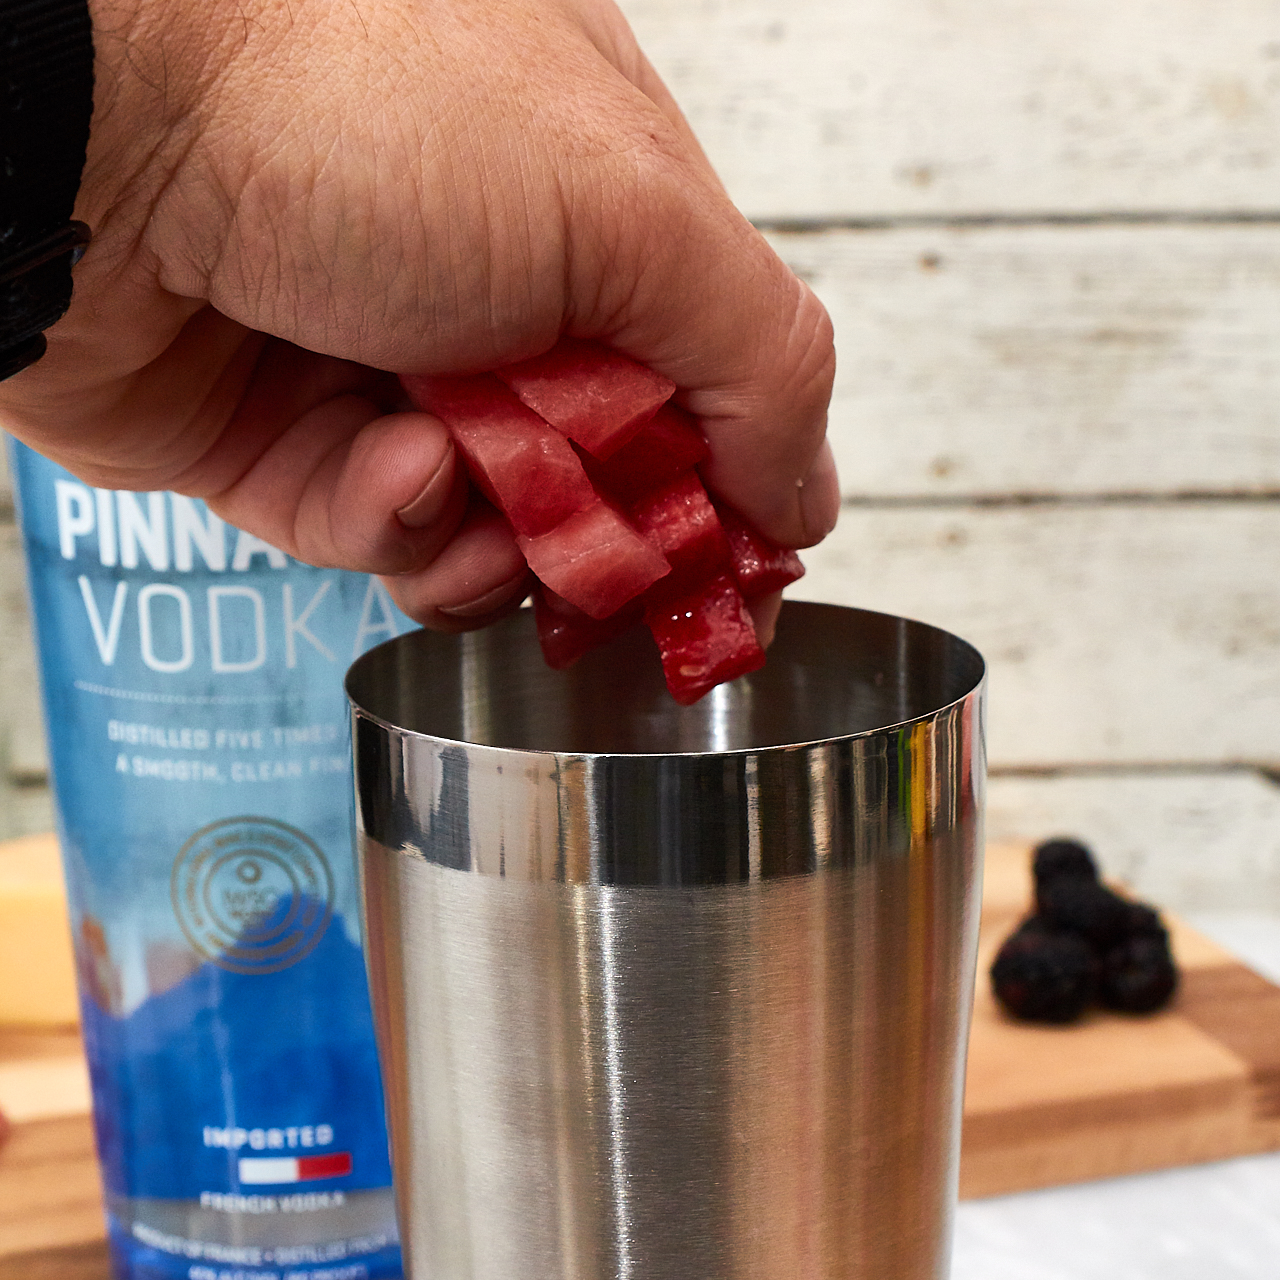 French Inspired: Appetizers and Cocktails featuring Pinnacle Vodka